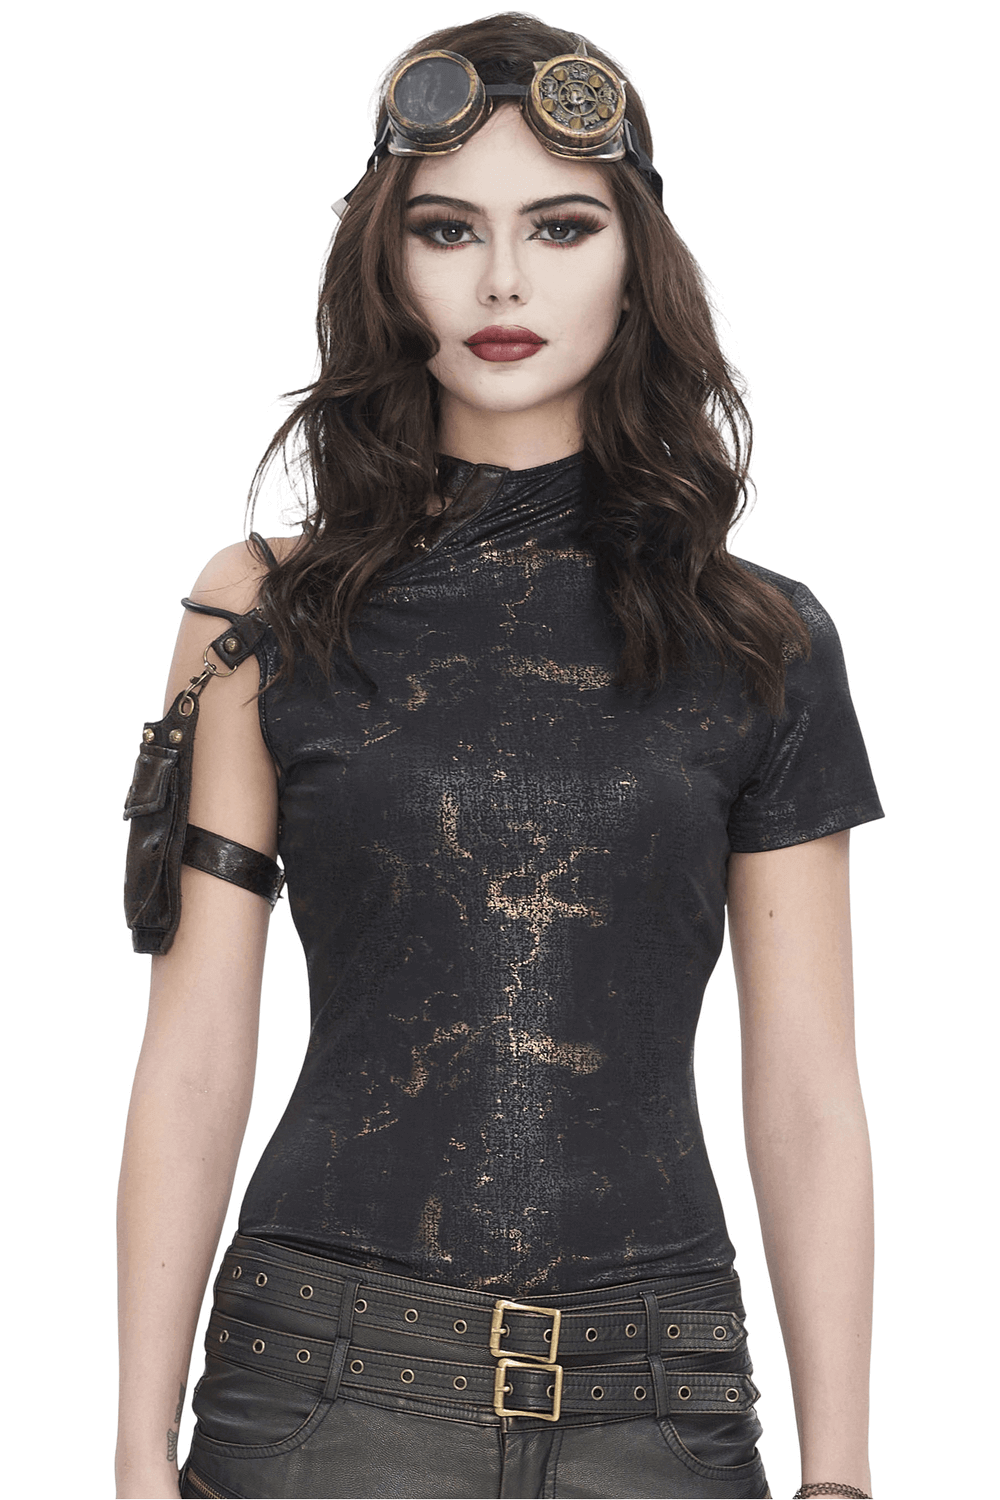 Edgy Black T-shirt with Gold Print and Pocket on Shoulder